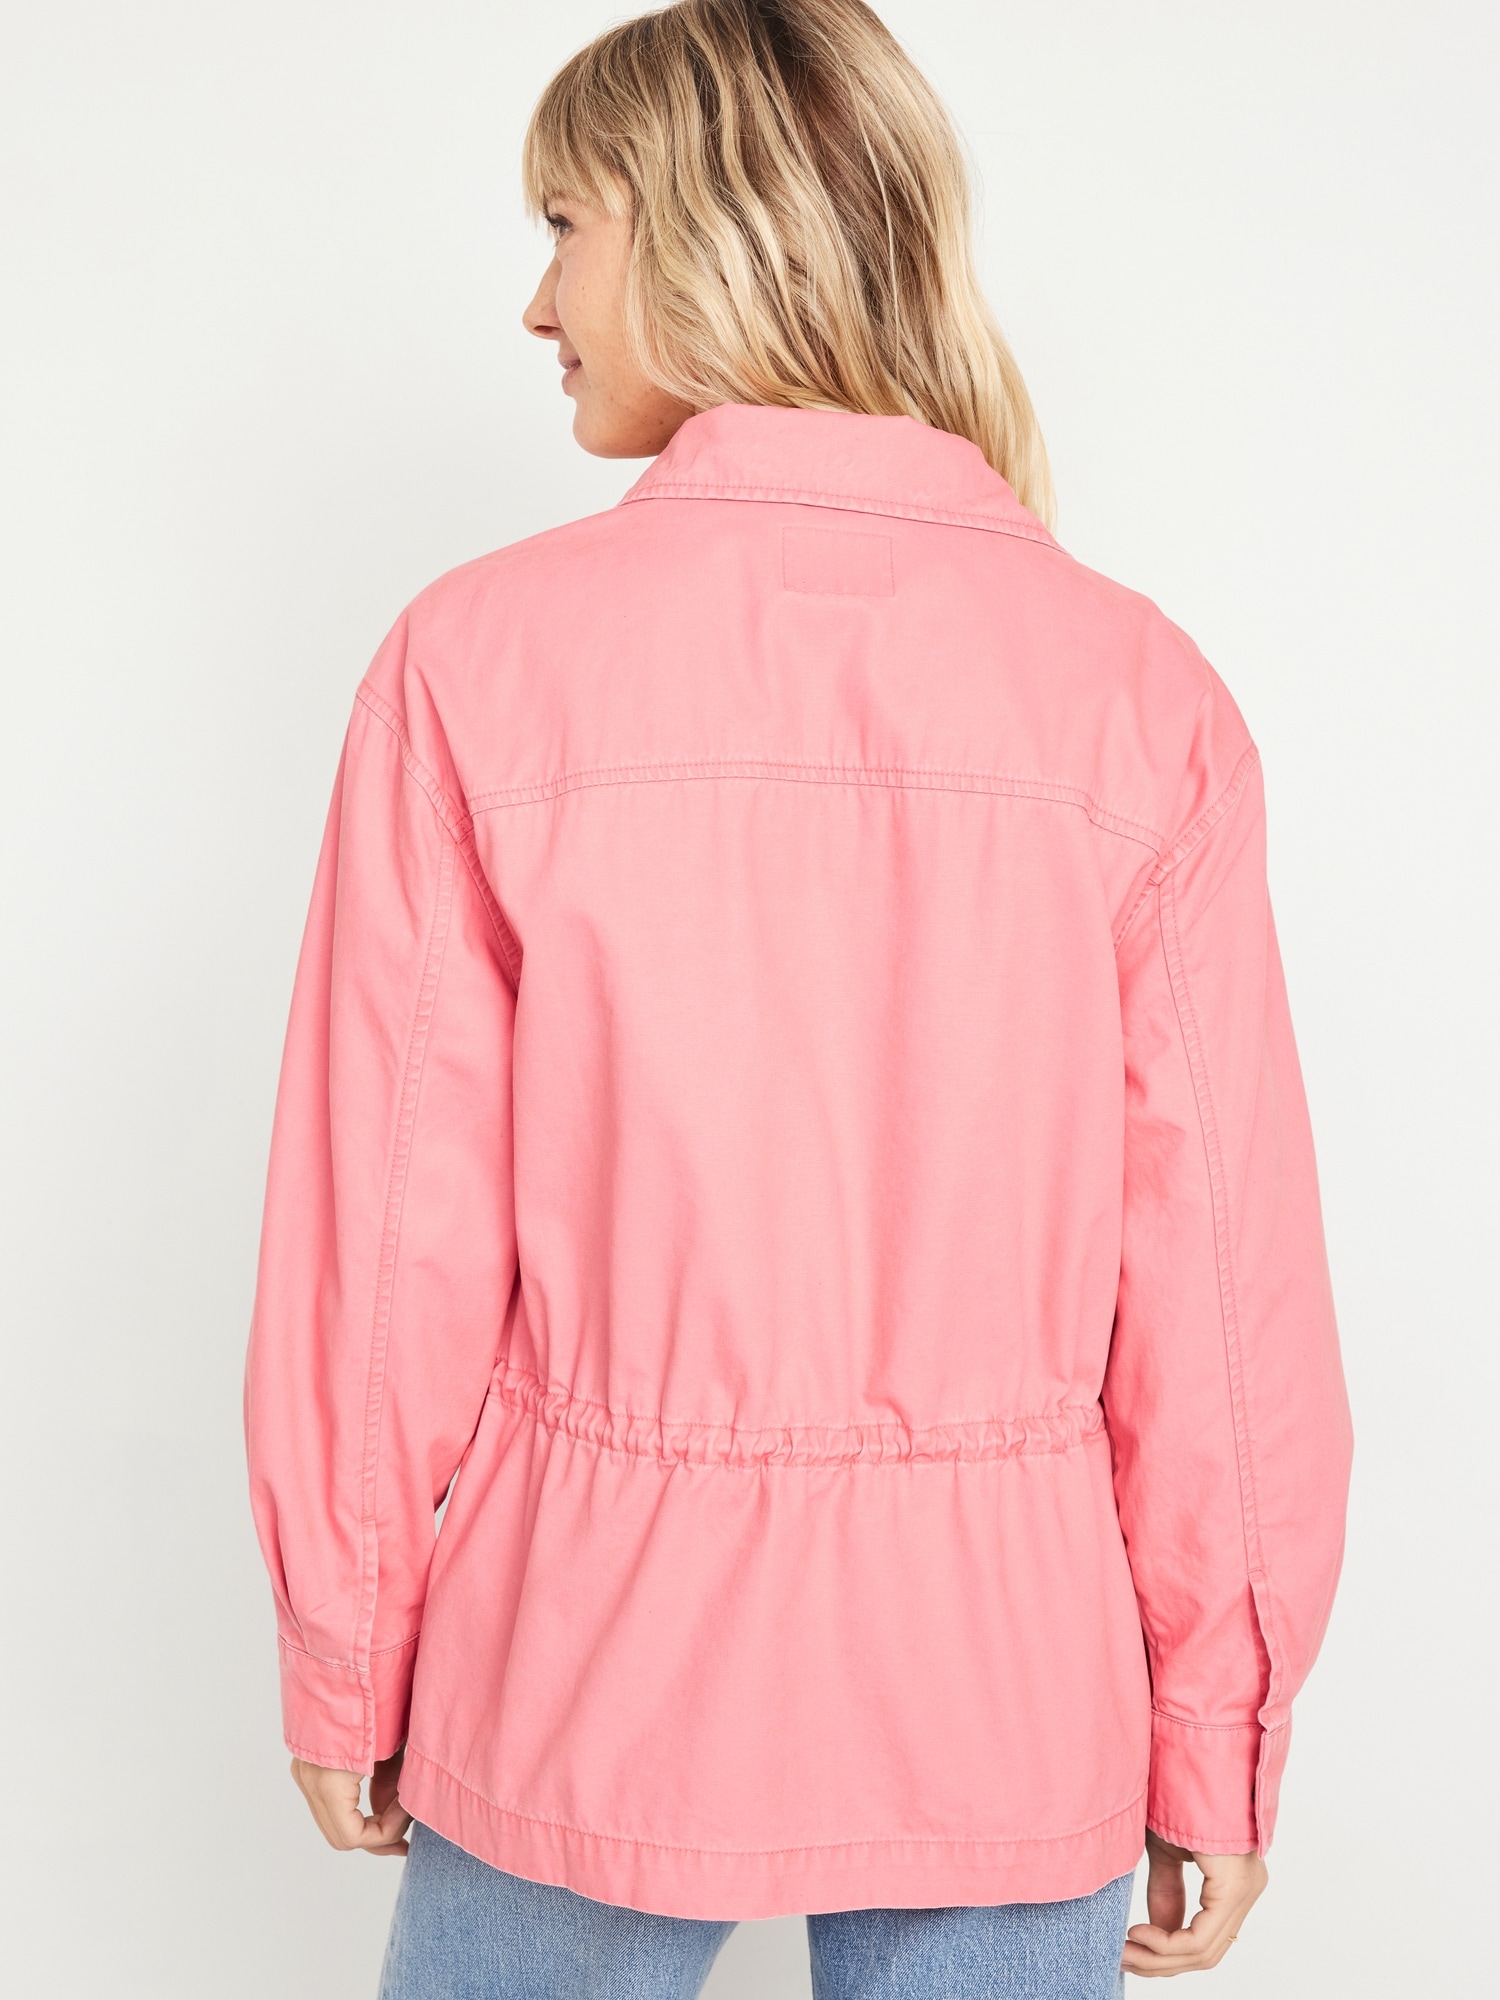 Cinched-Waist Utility Jacket | Old Navy